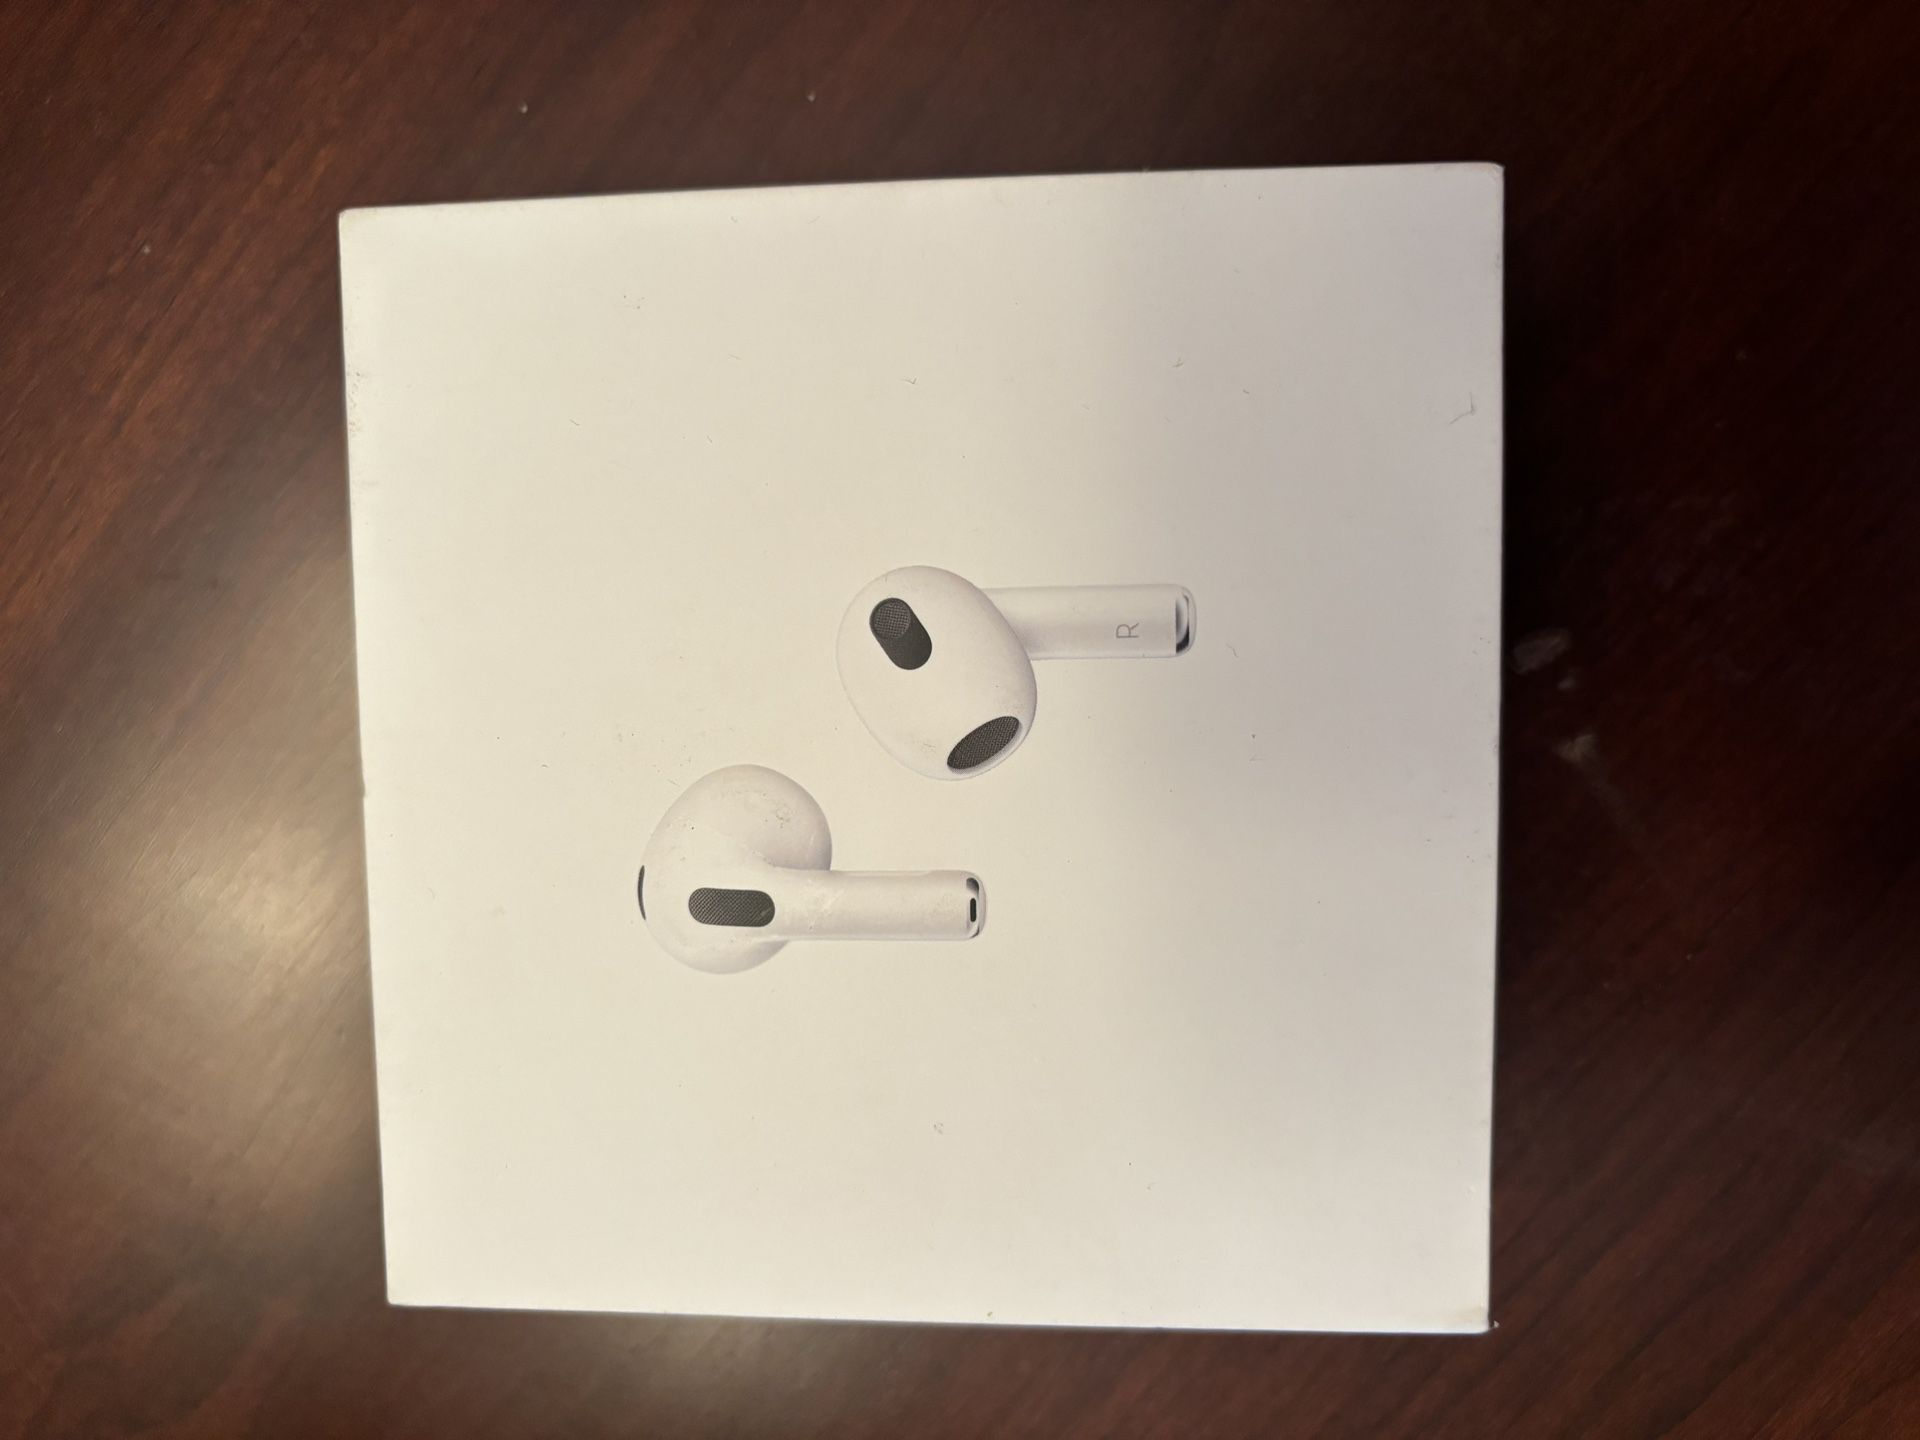 3rd Generation AirPods - BRAND NEW